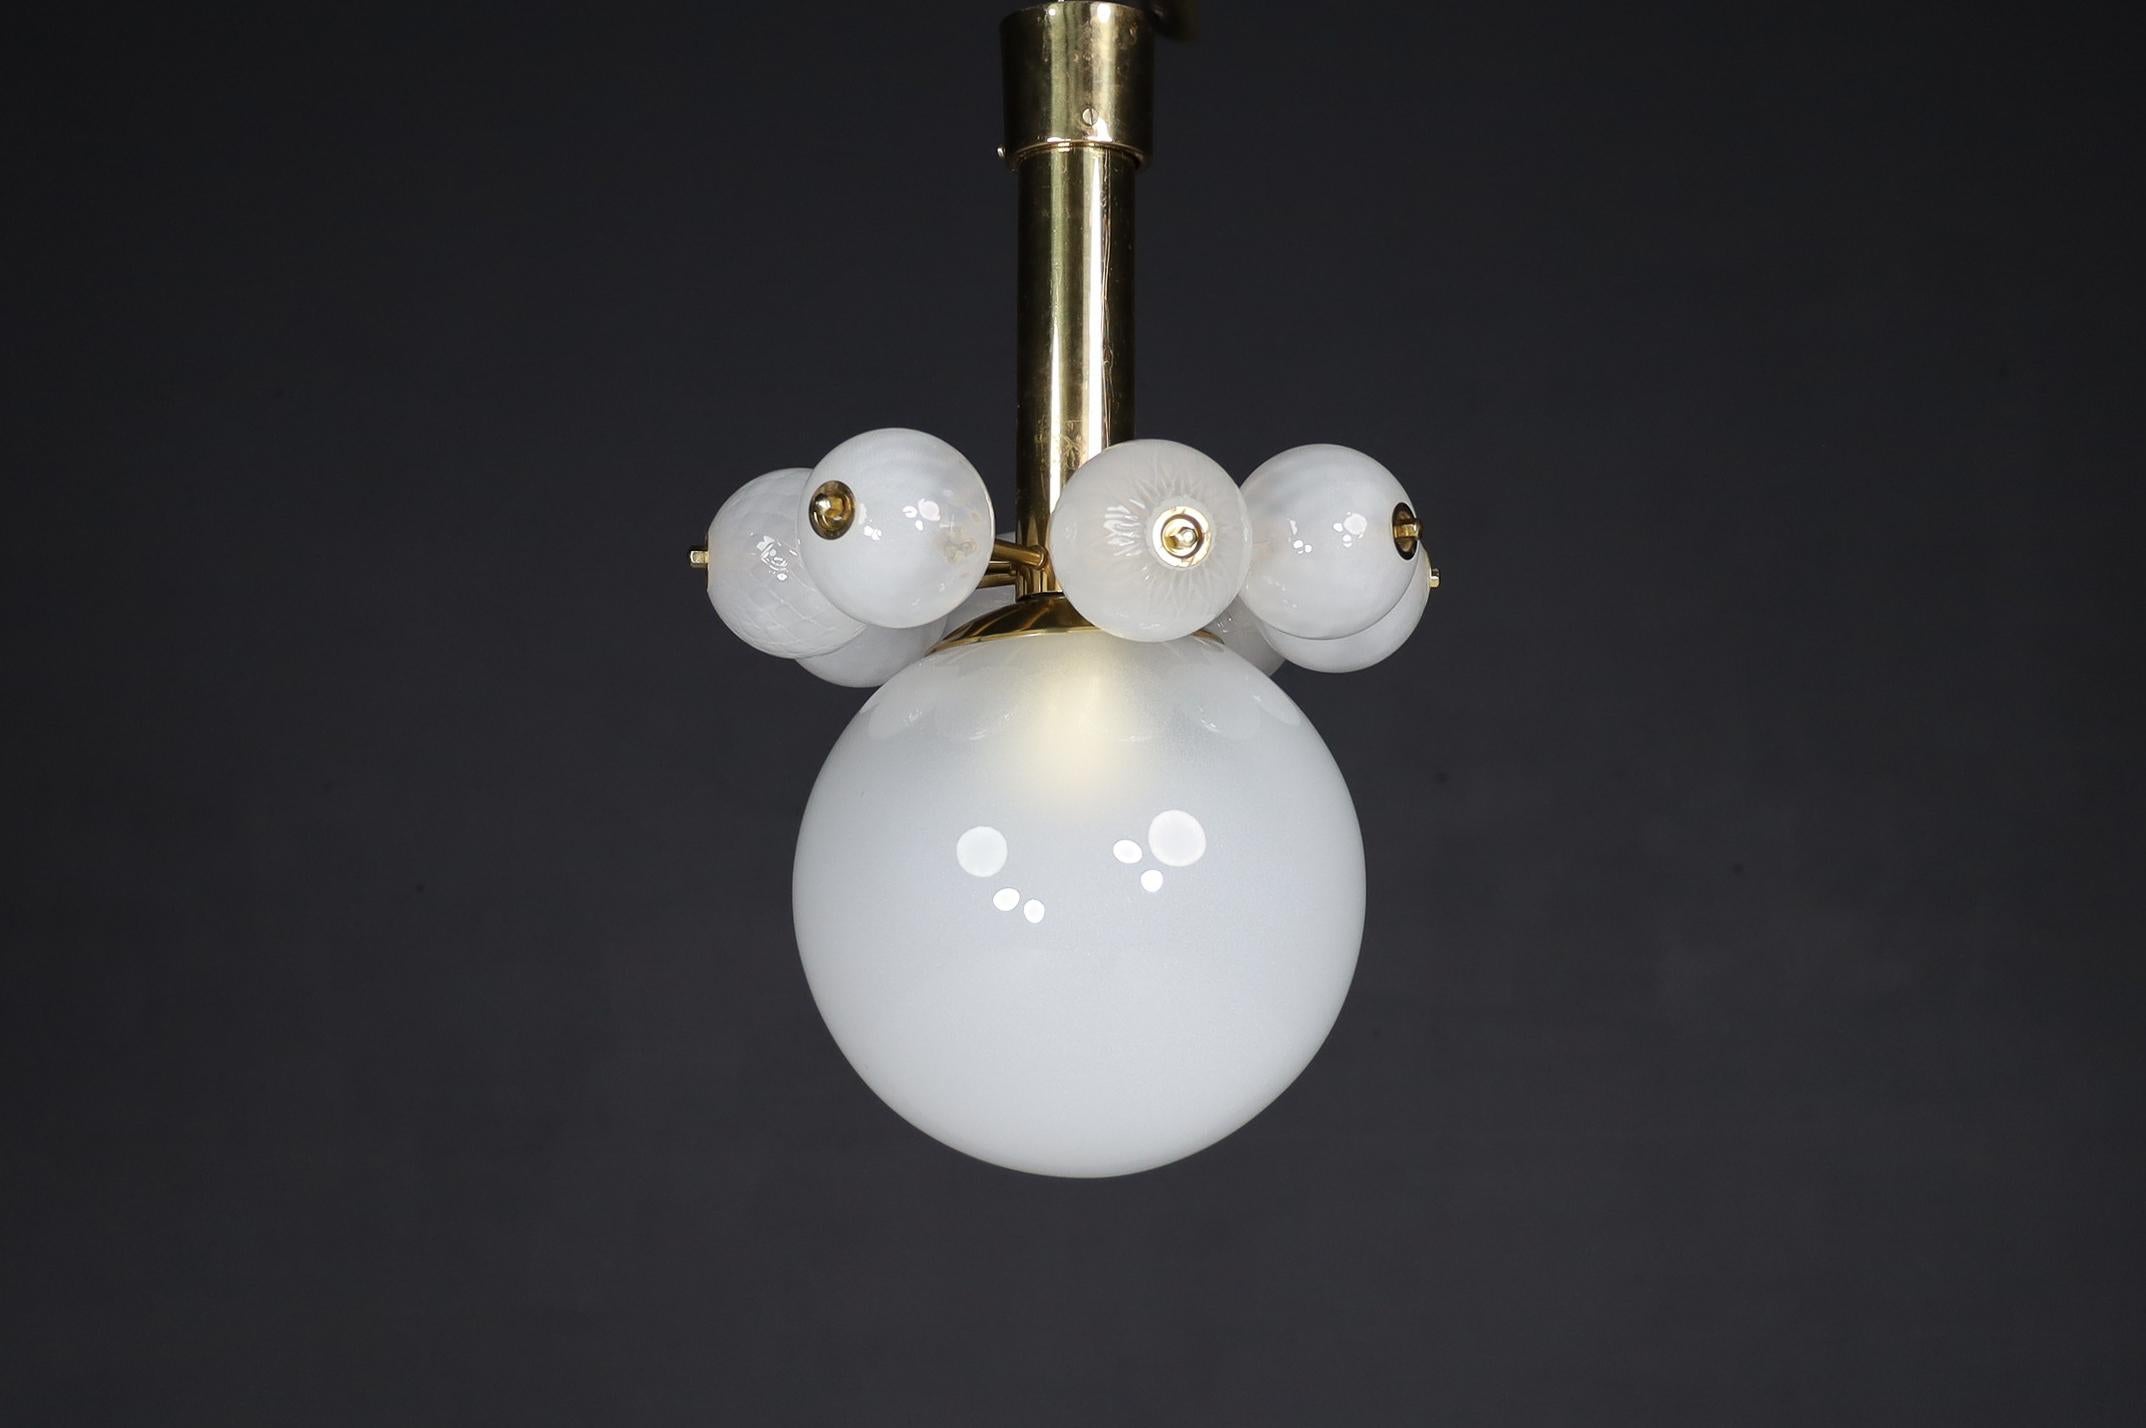 Large set chandelier with brass fixture and hand-blowed frosted glass globes, Czechia 1960s

An extensive set chandelier with a brass fixture was produced and designed in Czechia in the 1960s. A large frosted glass globe and eight smaller